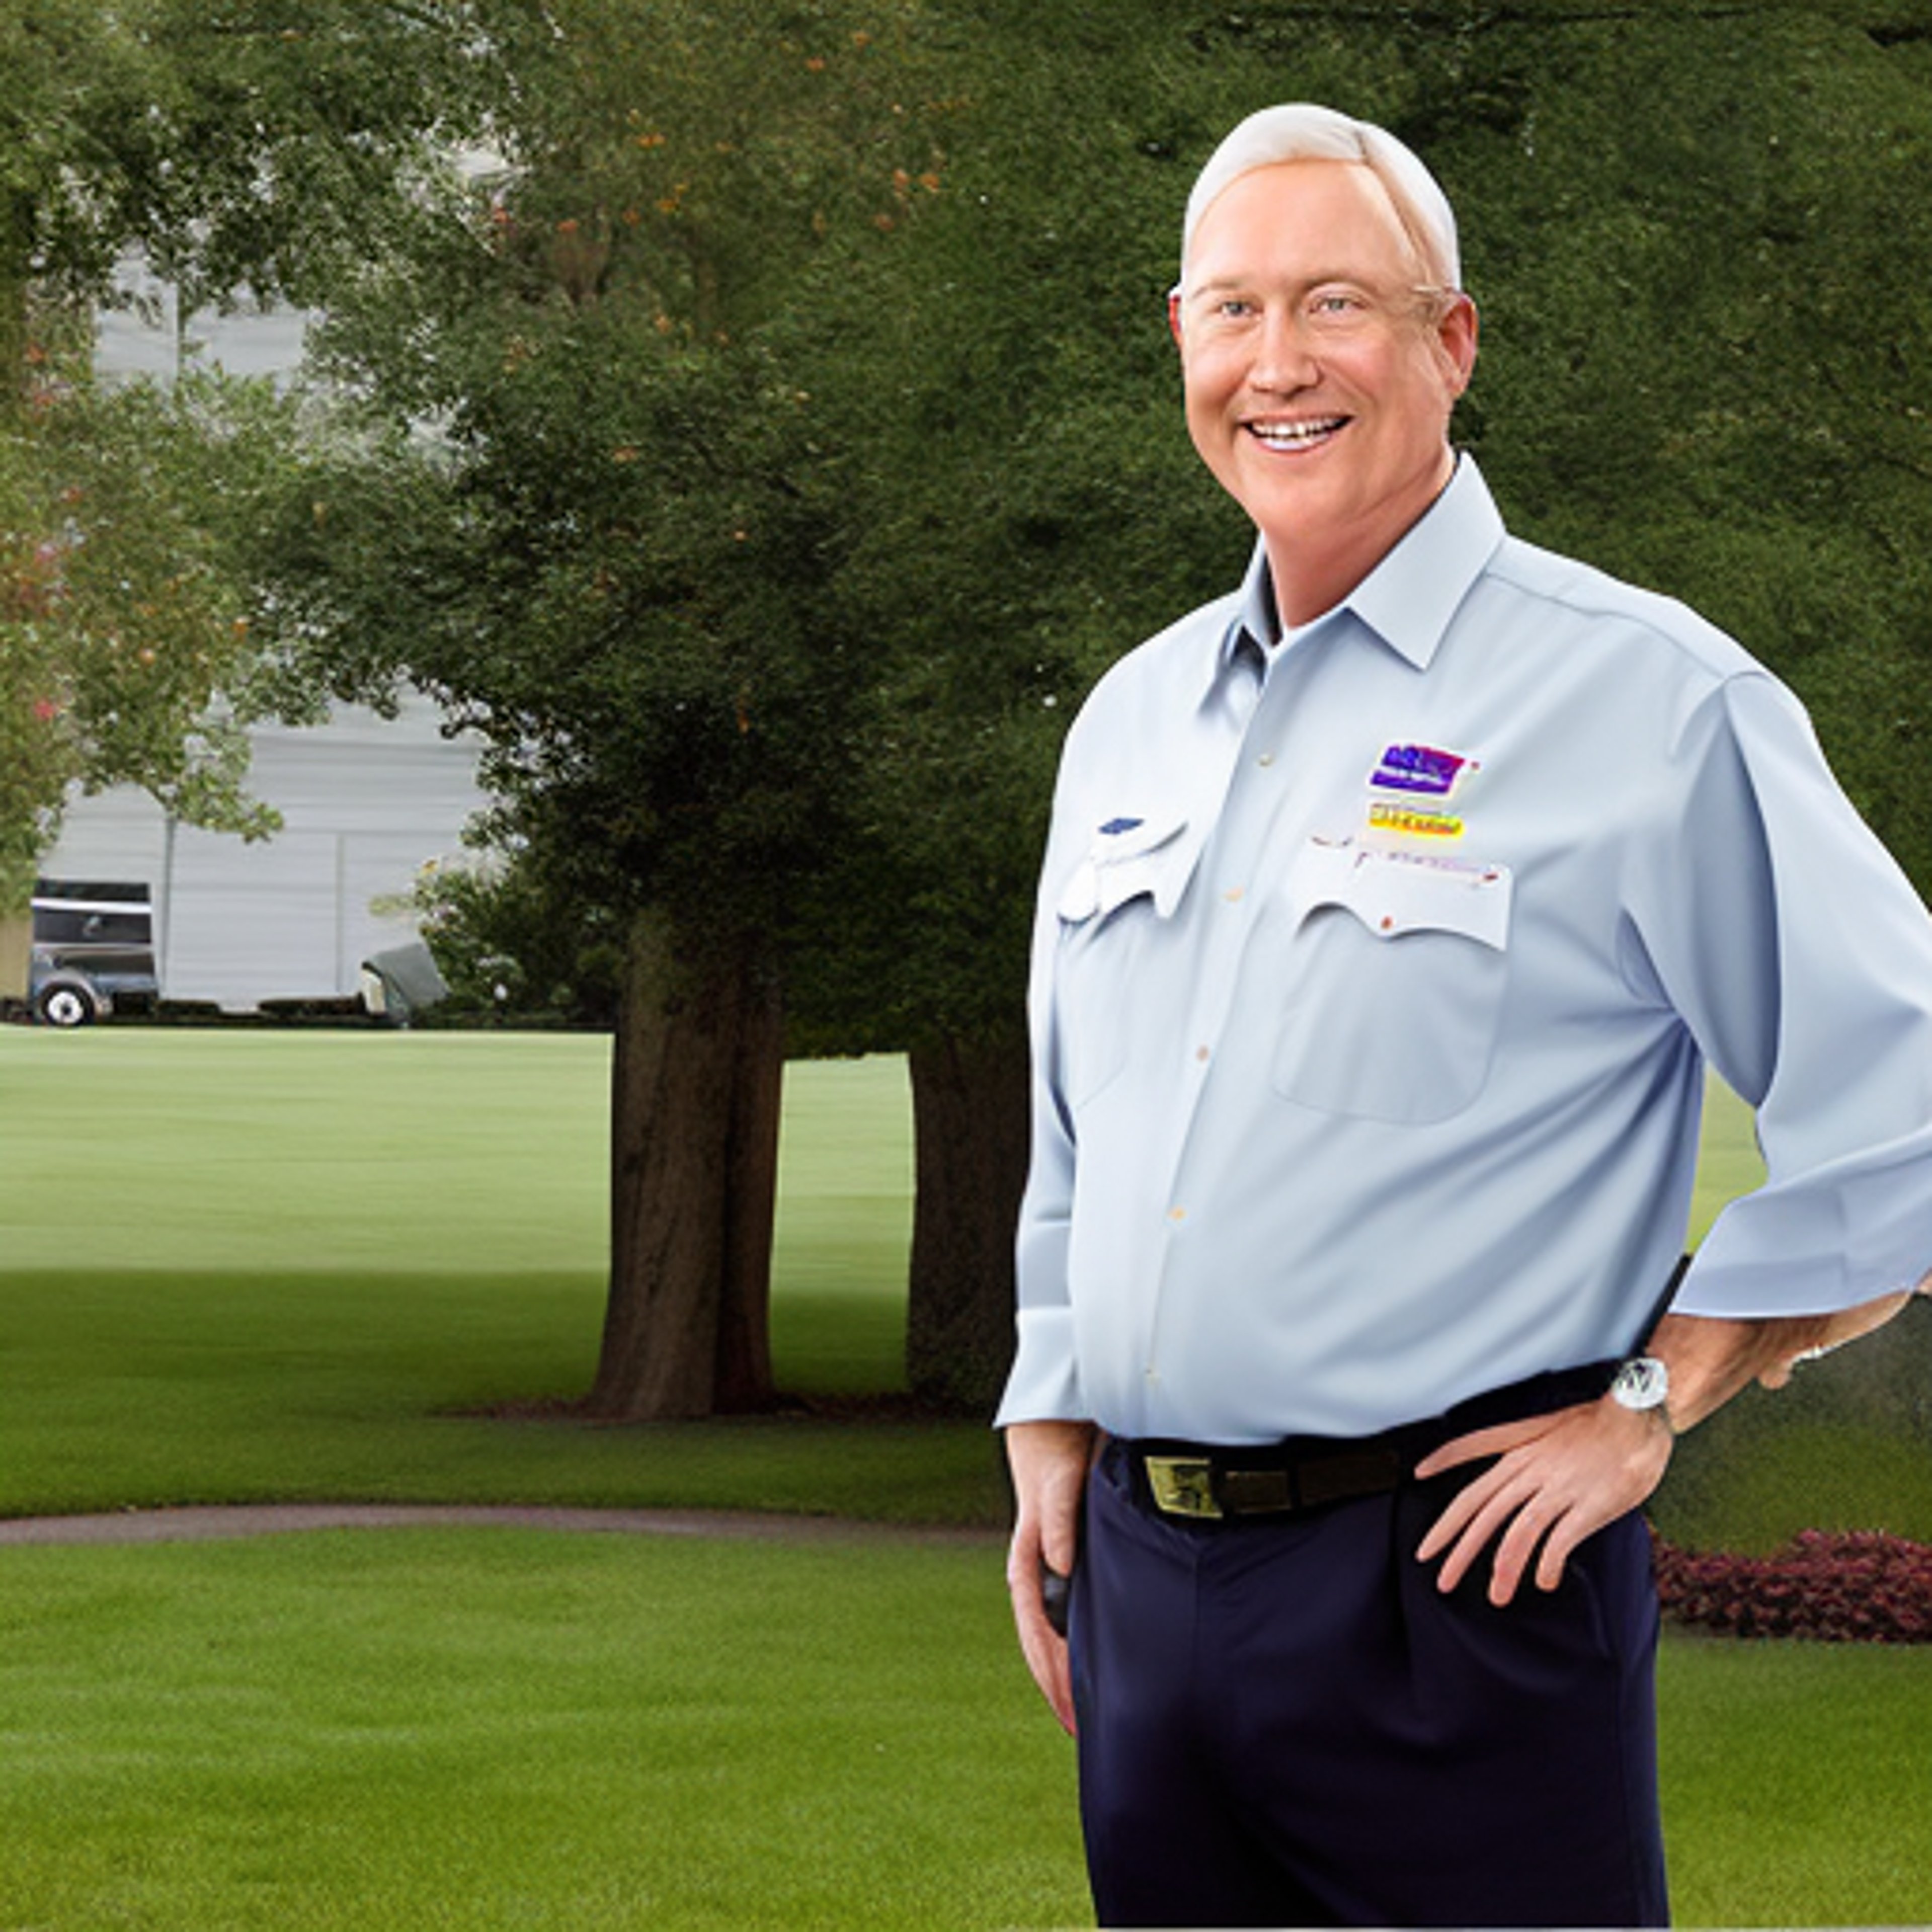 Life in the Express Lane: Richard Smith Helps Lead FedEx into its Future